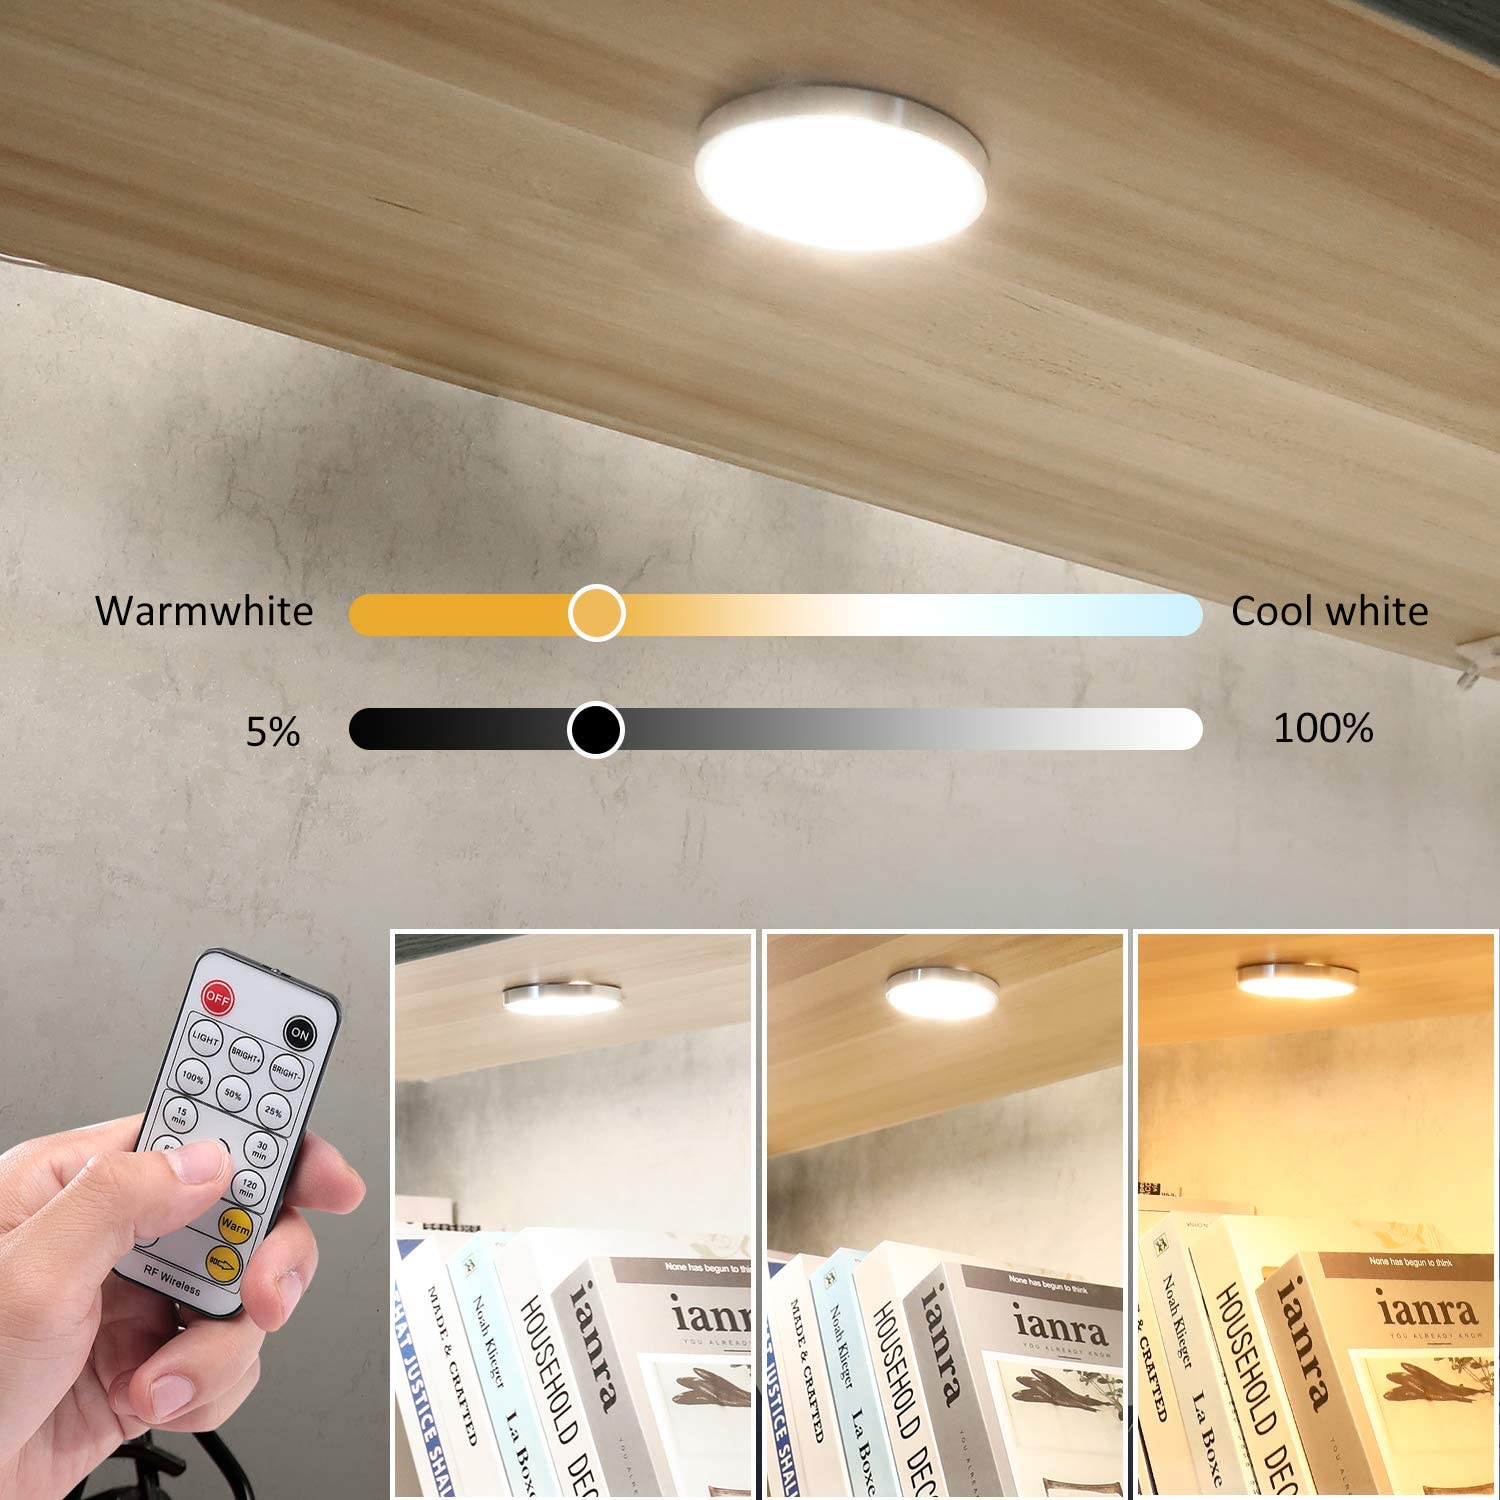 AIBOO LED Under Cabinet Puck Lights CCT Light Color Temperature Adjustable Warm+White Double Color with Dimmable RF Remote Controller for Kitchen Shelf Ambiance Display Lighting (8 Lights, 24W)